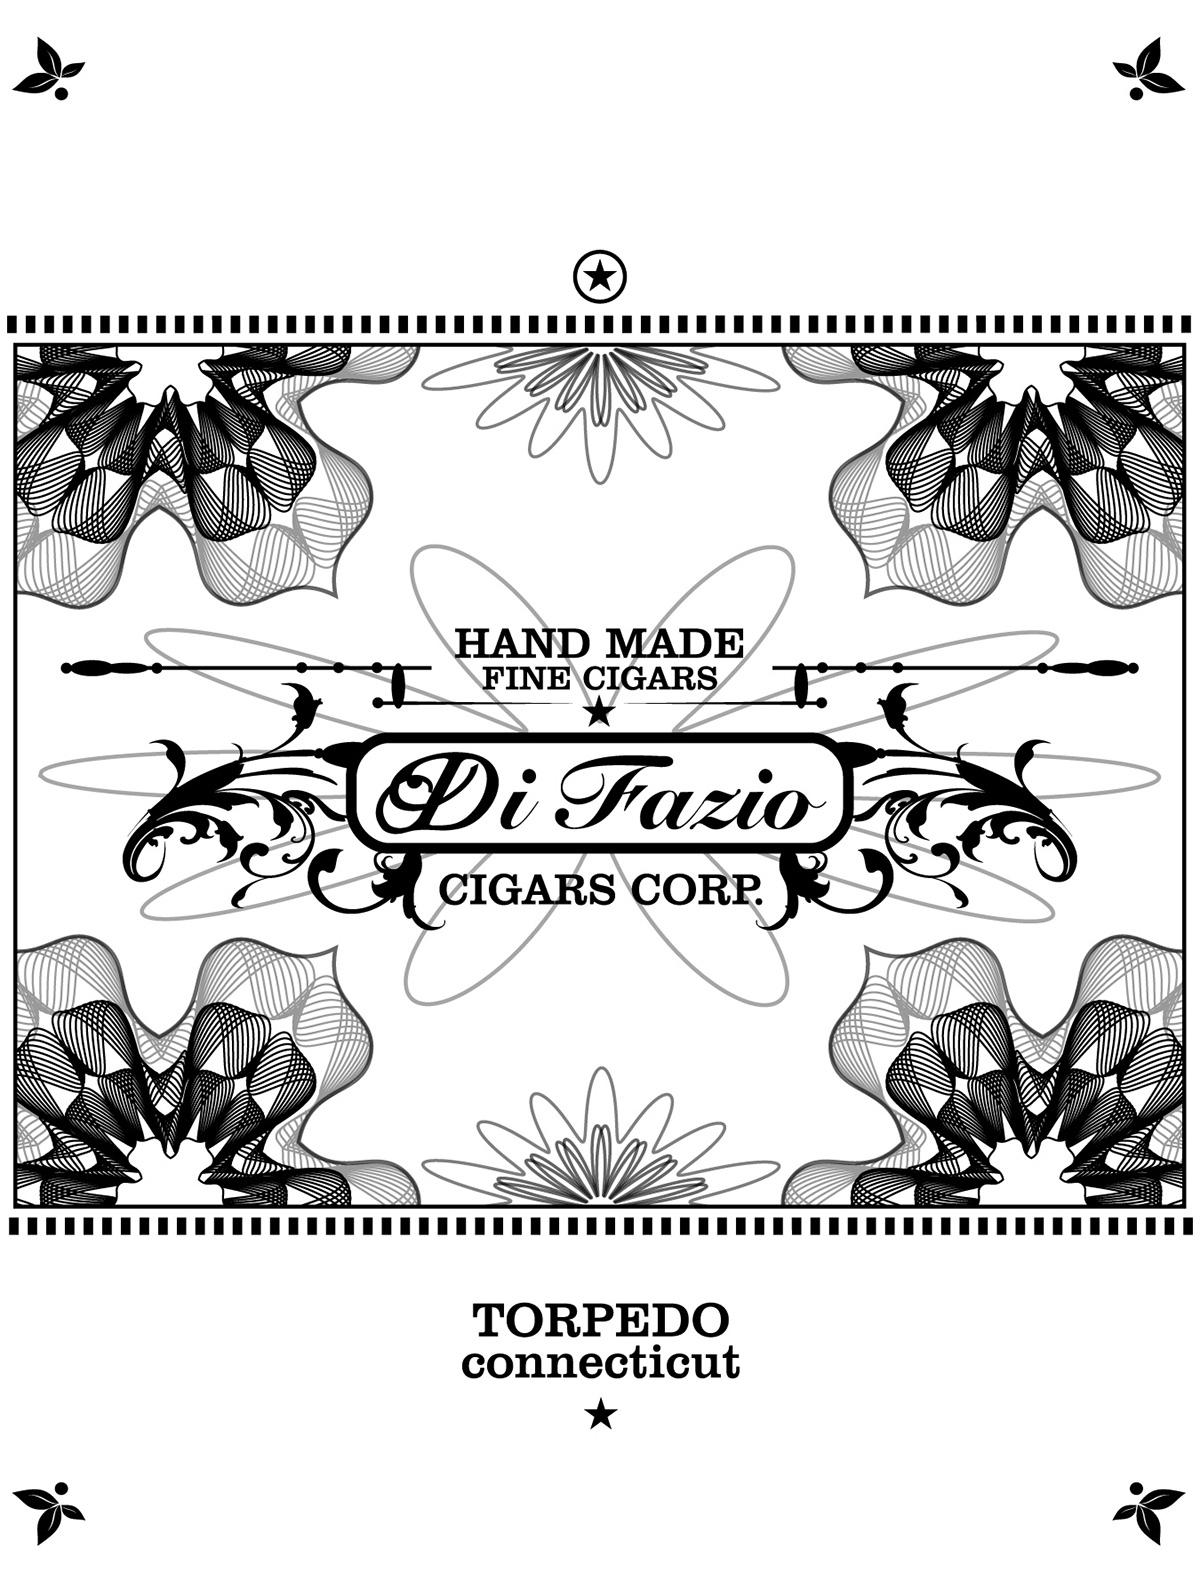 cigar labels Stationery Antonio Rojas banners Smokers print inspire